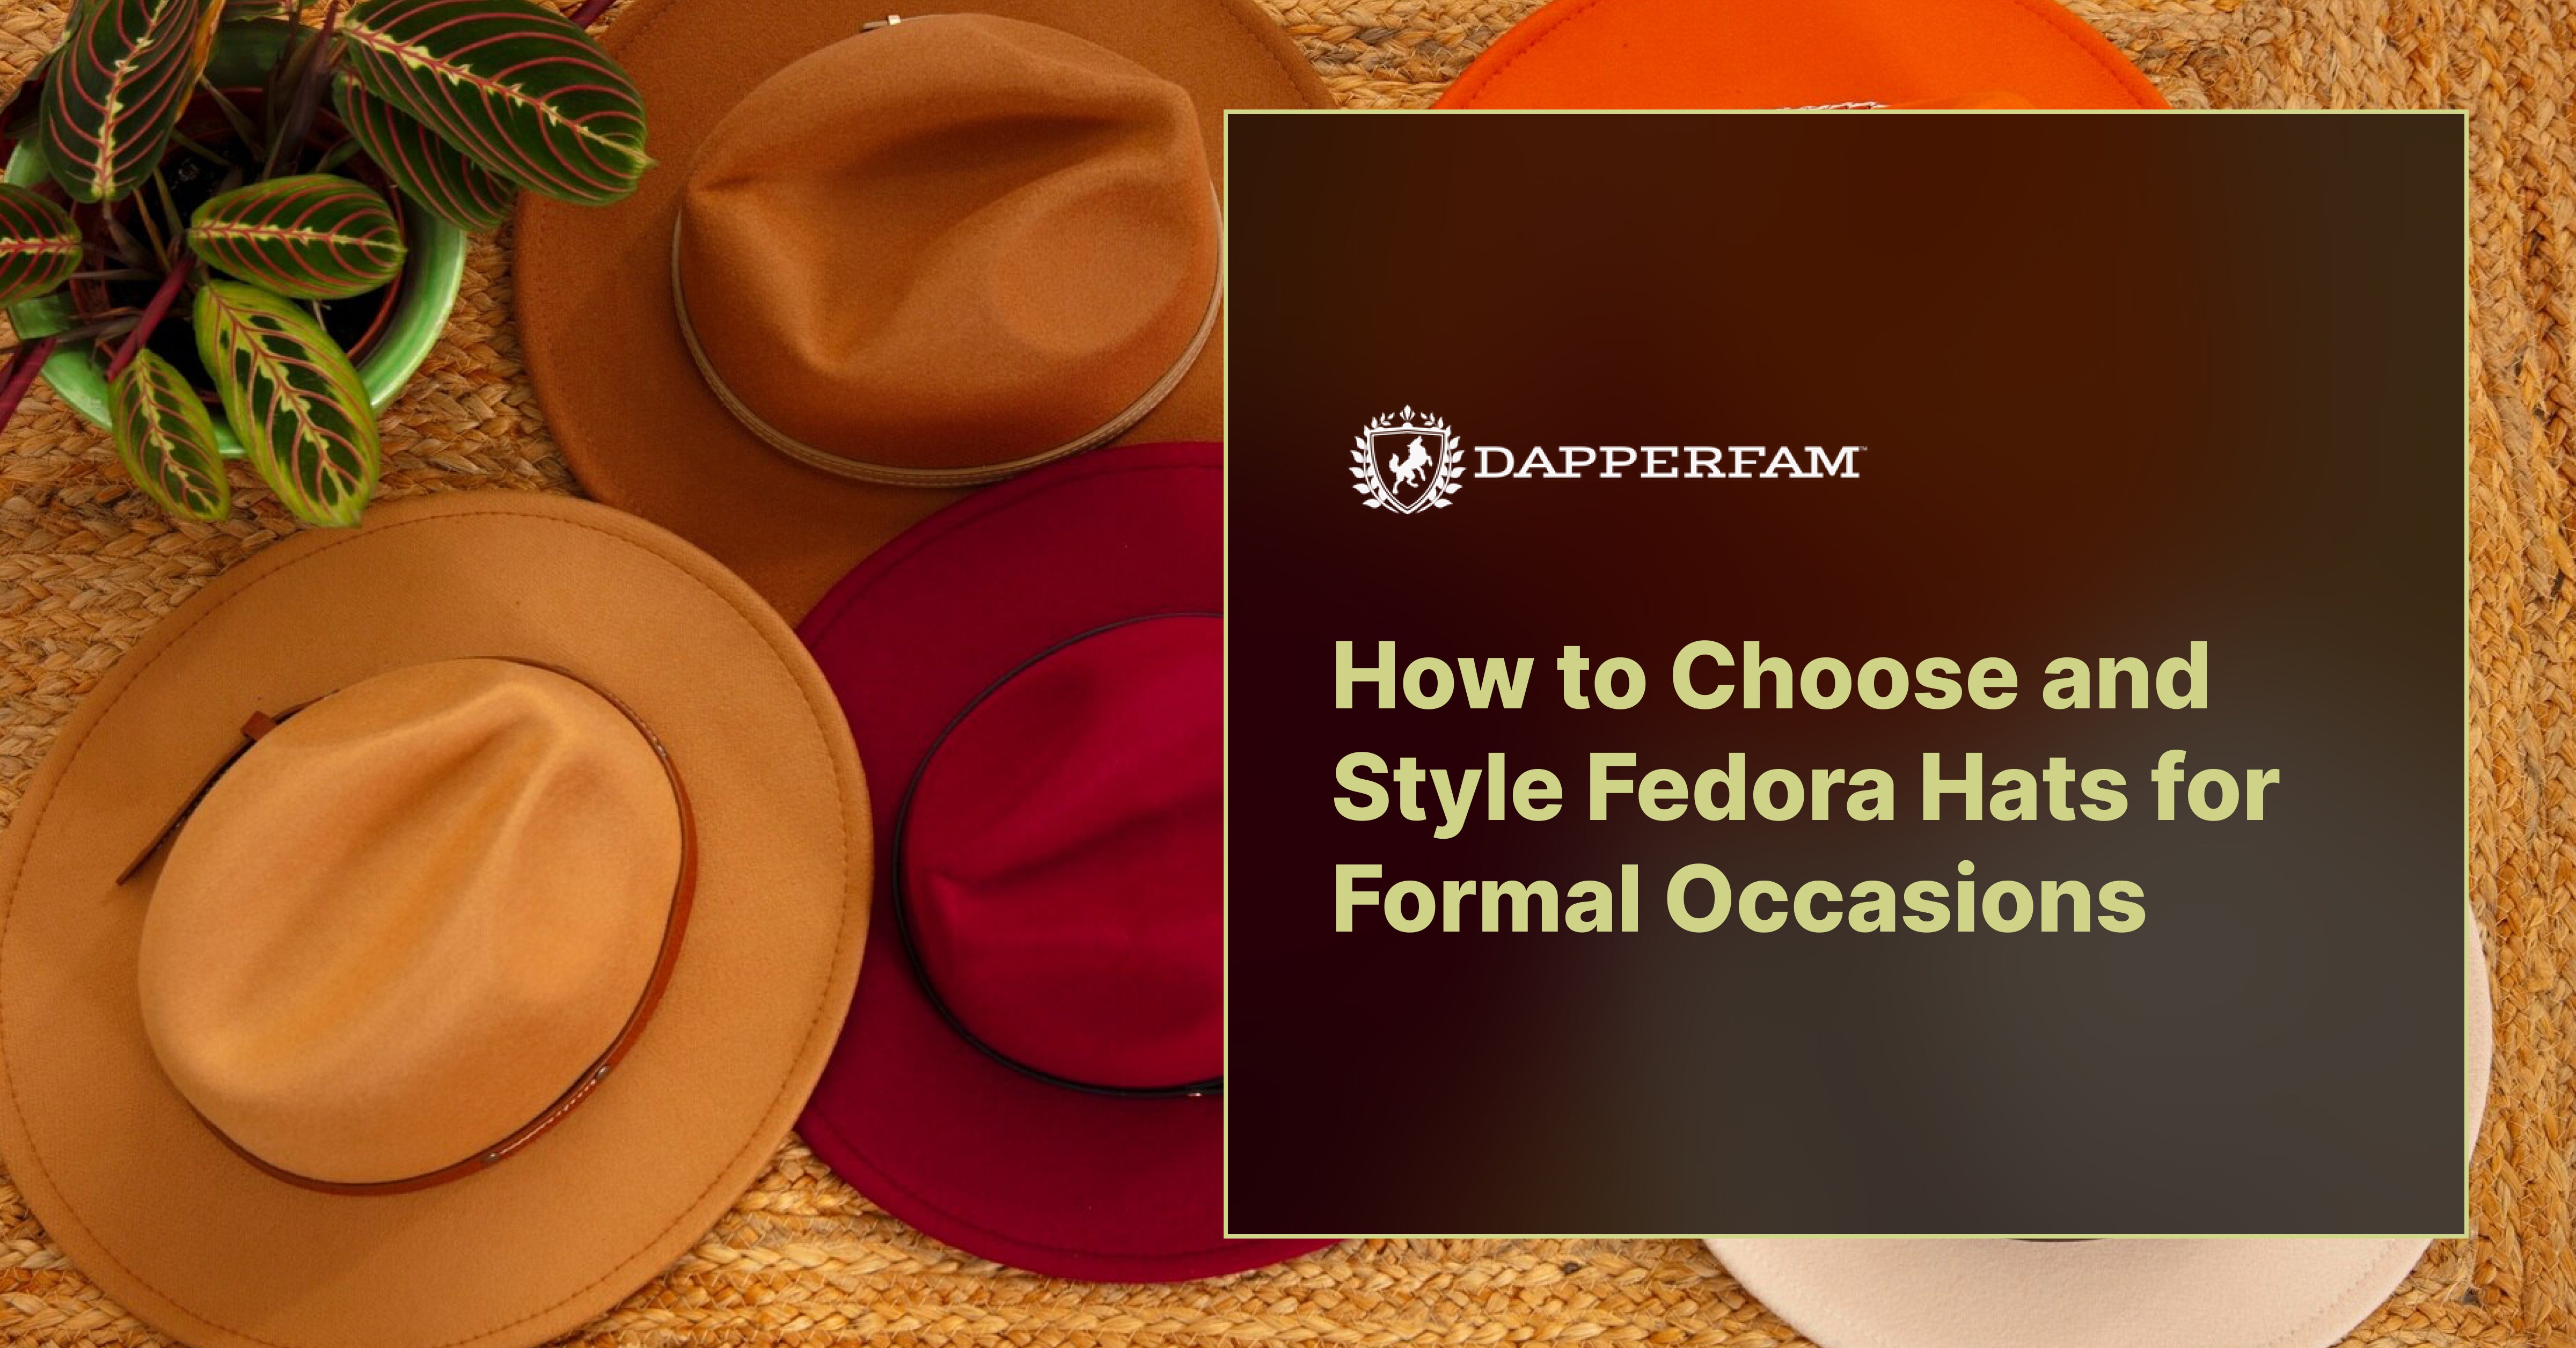 How to Choose and Style Fedora Hats for Formal Occasions – DAPPERFAM